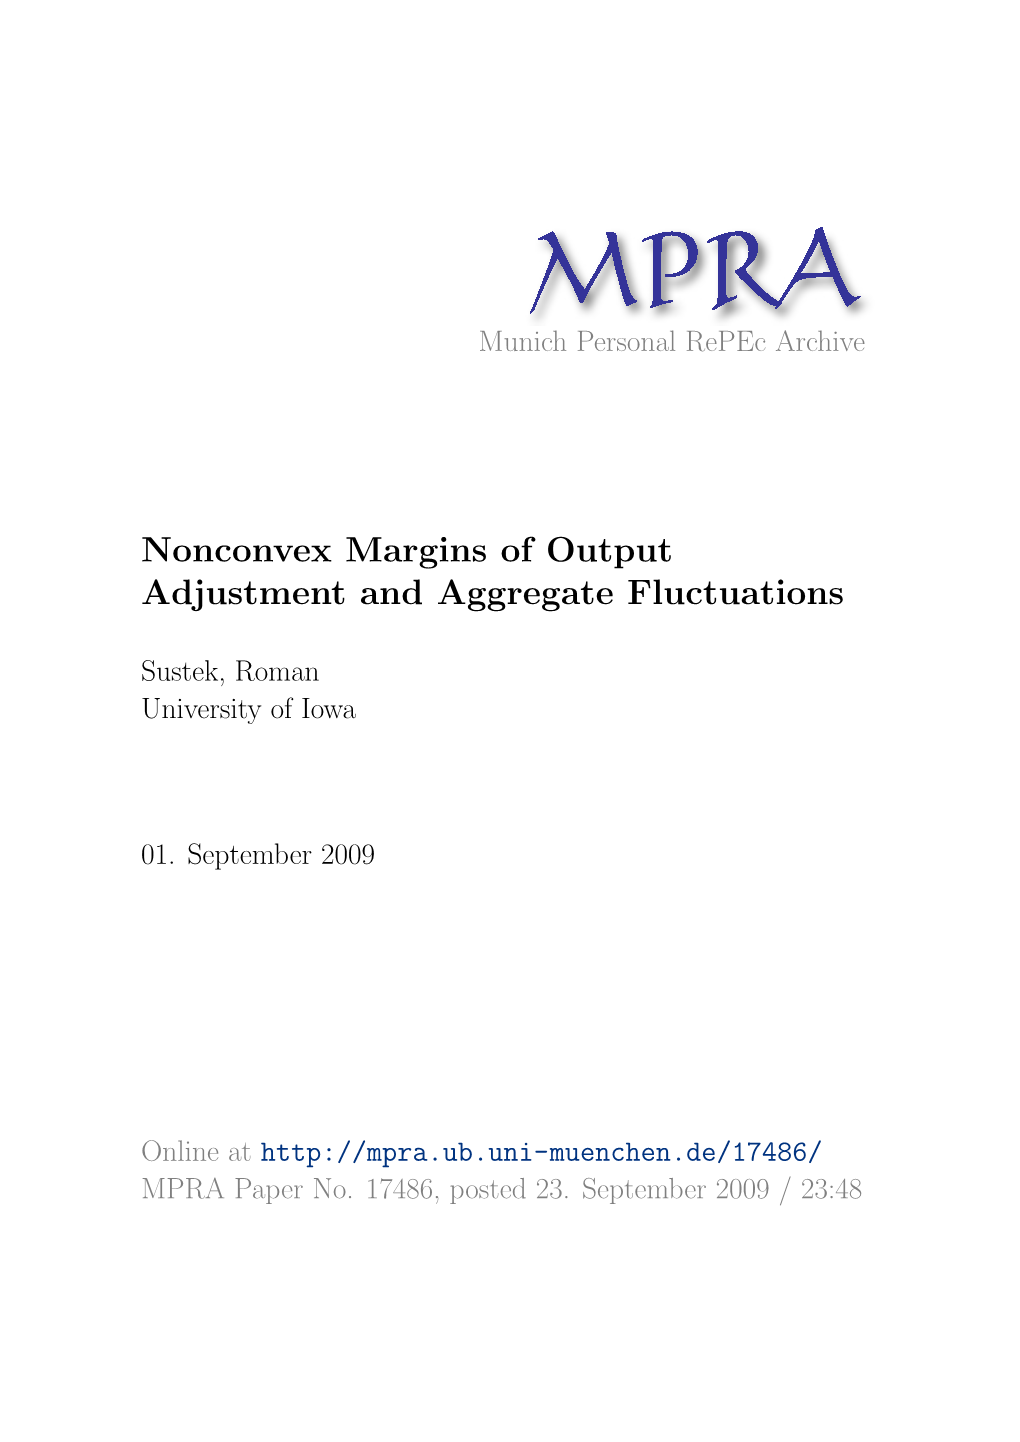 Nonconvex Margins of Output Adjustment and Aggregate Fluctuations